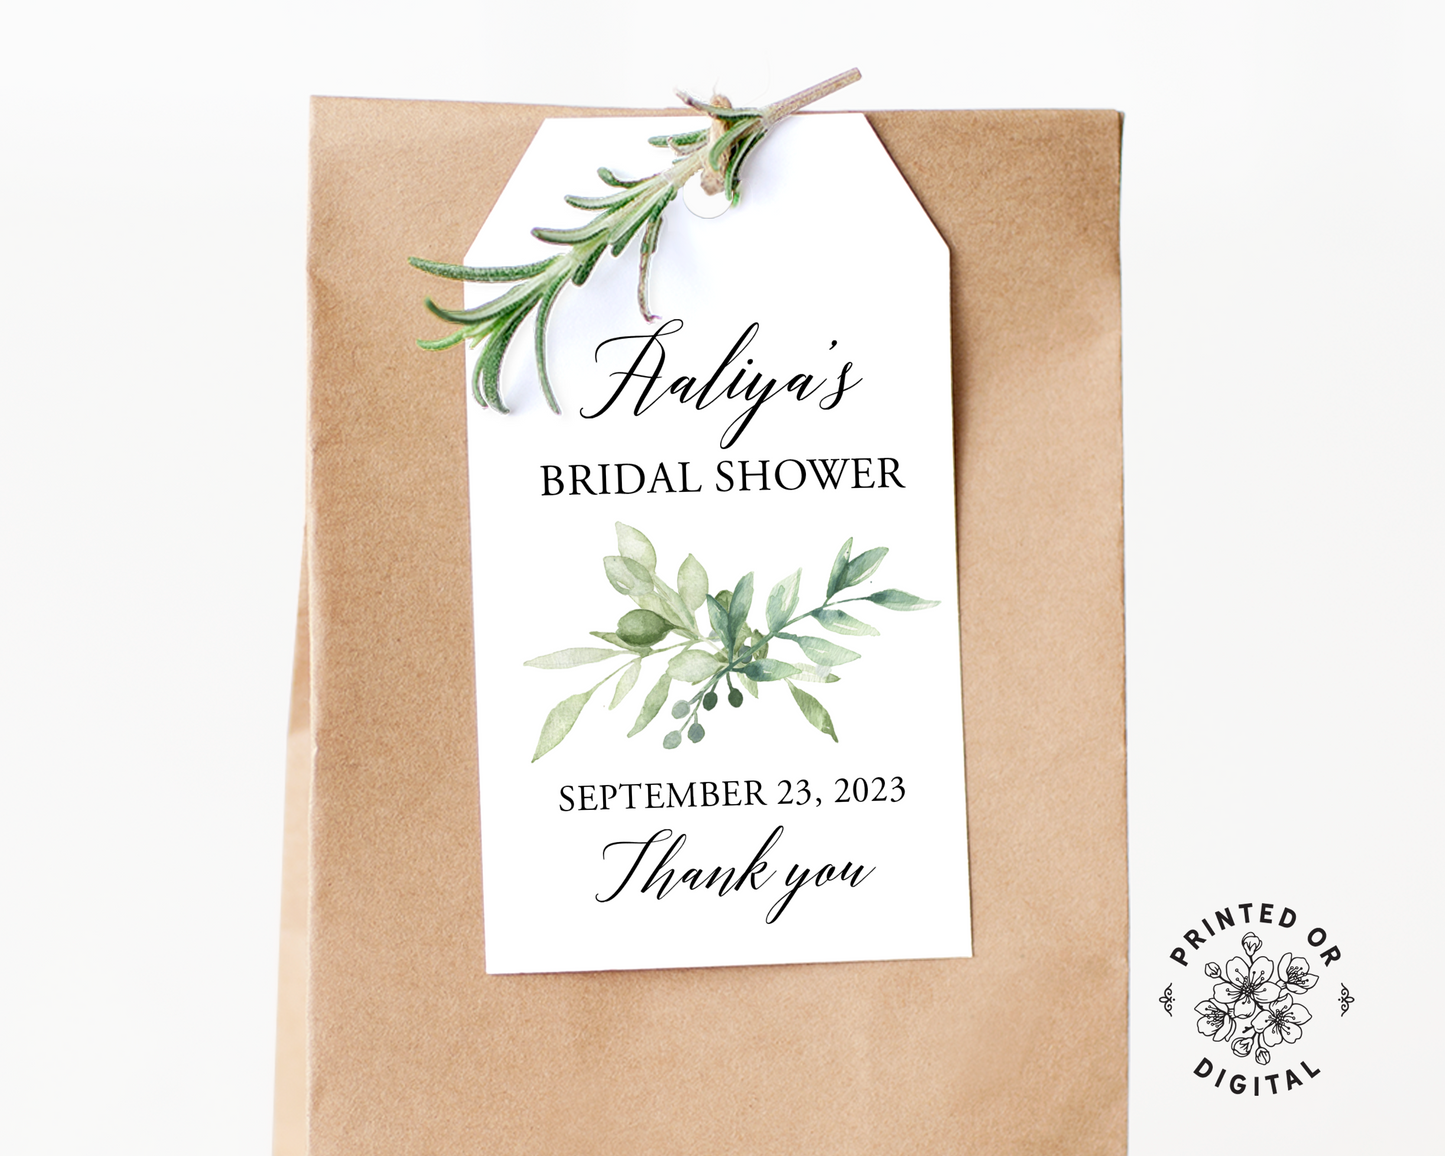 Lux Party’s white bridal shower favor tag with black script and greenery leaves, affixed to a brown kraft favor bag.